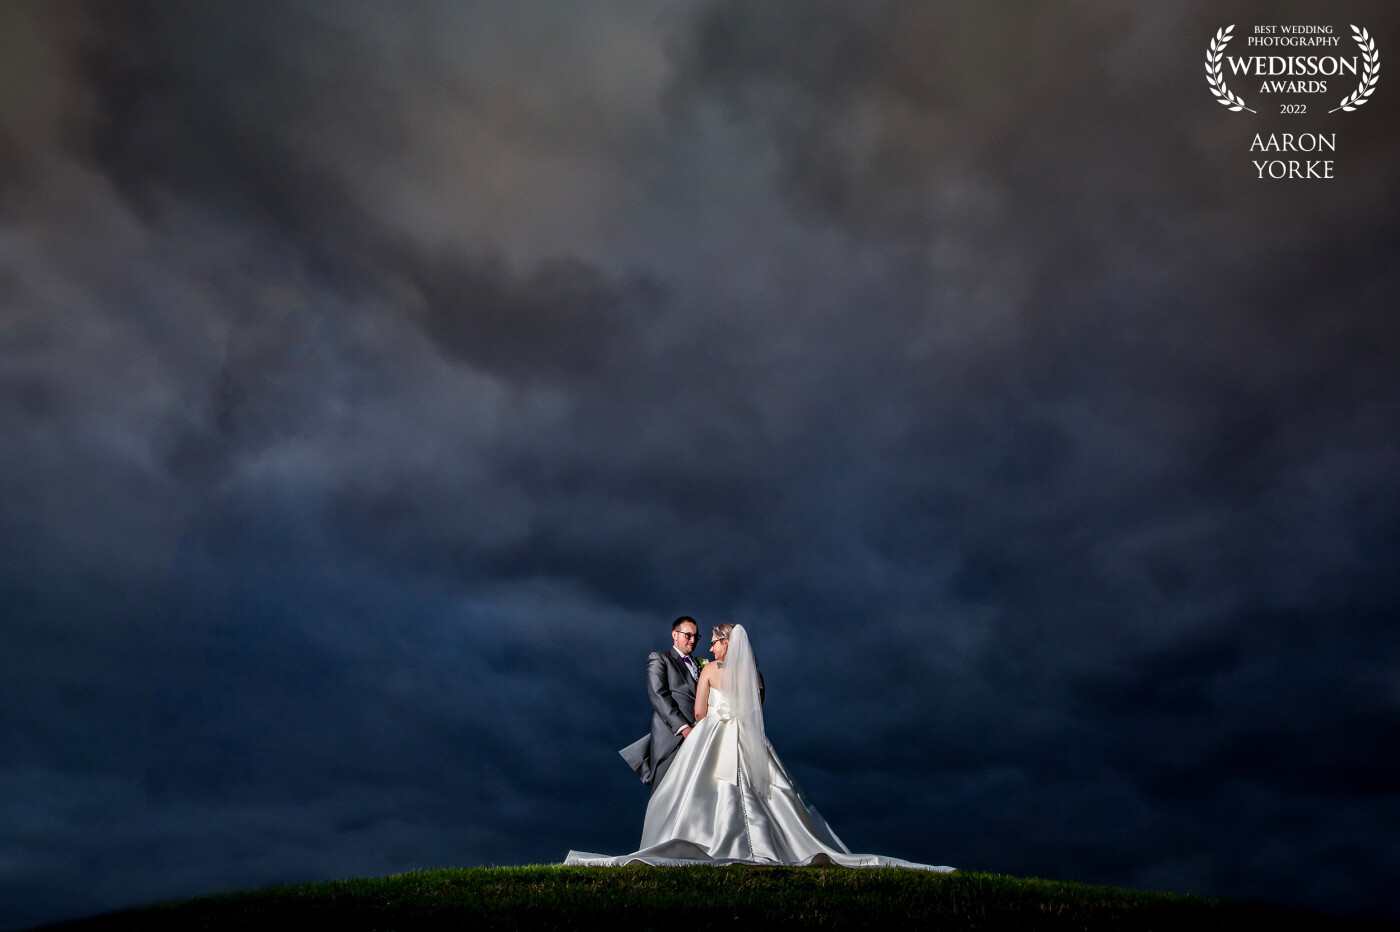 This shot was taken at the Beautiful Forest of Arden in Meriden, Warwickshire. There is a small hill on the golf course where I placed the couple. it was pitch black so to light them up I used a soft box placed to the right of them. I then brought out the sky and the epic clouds in post.